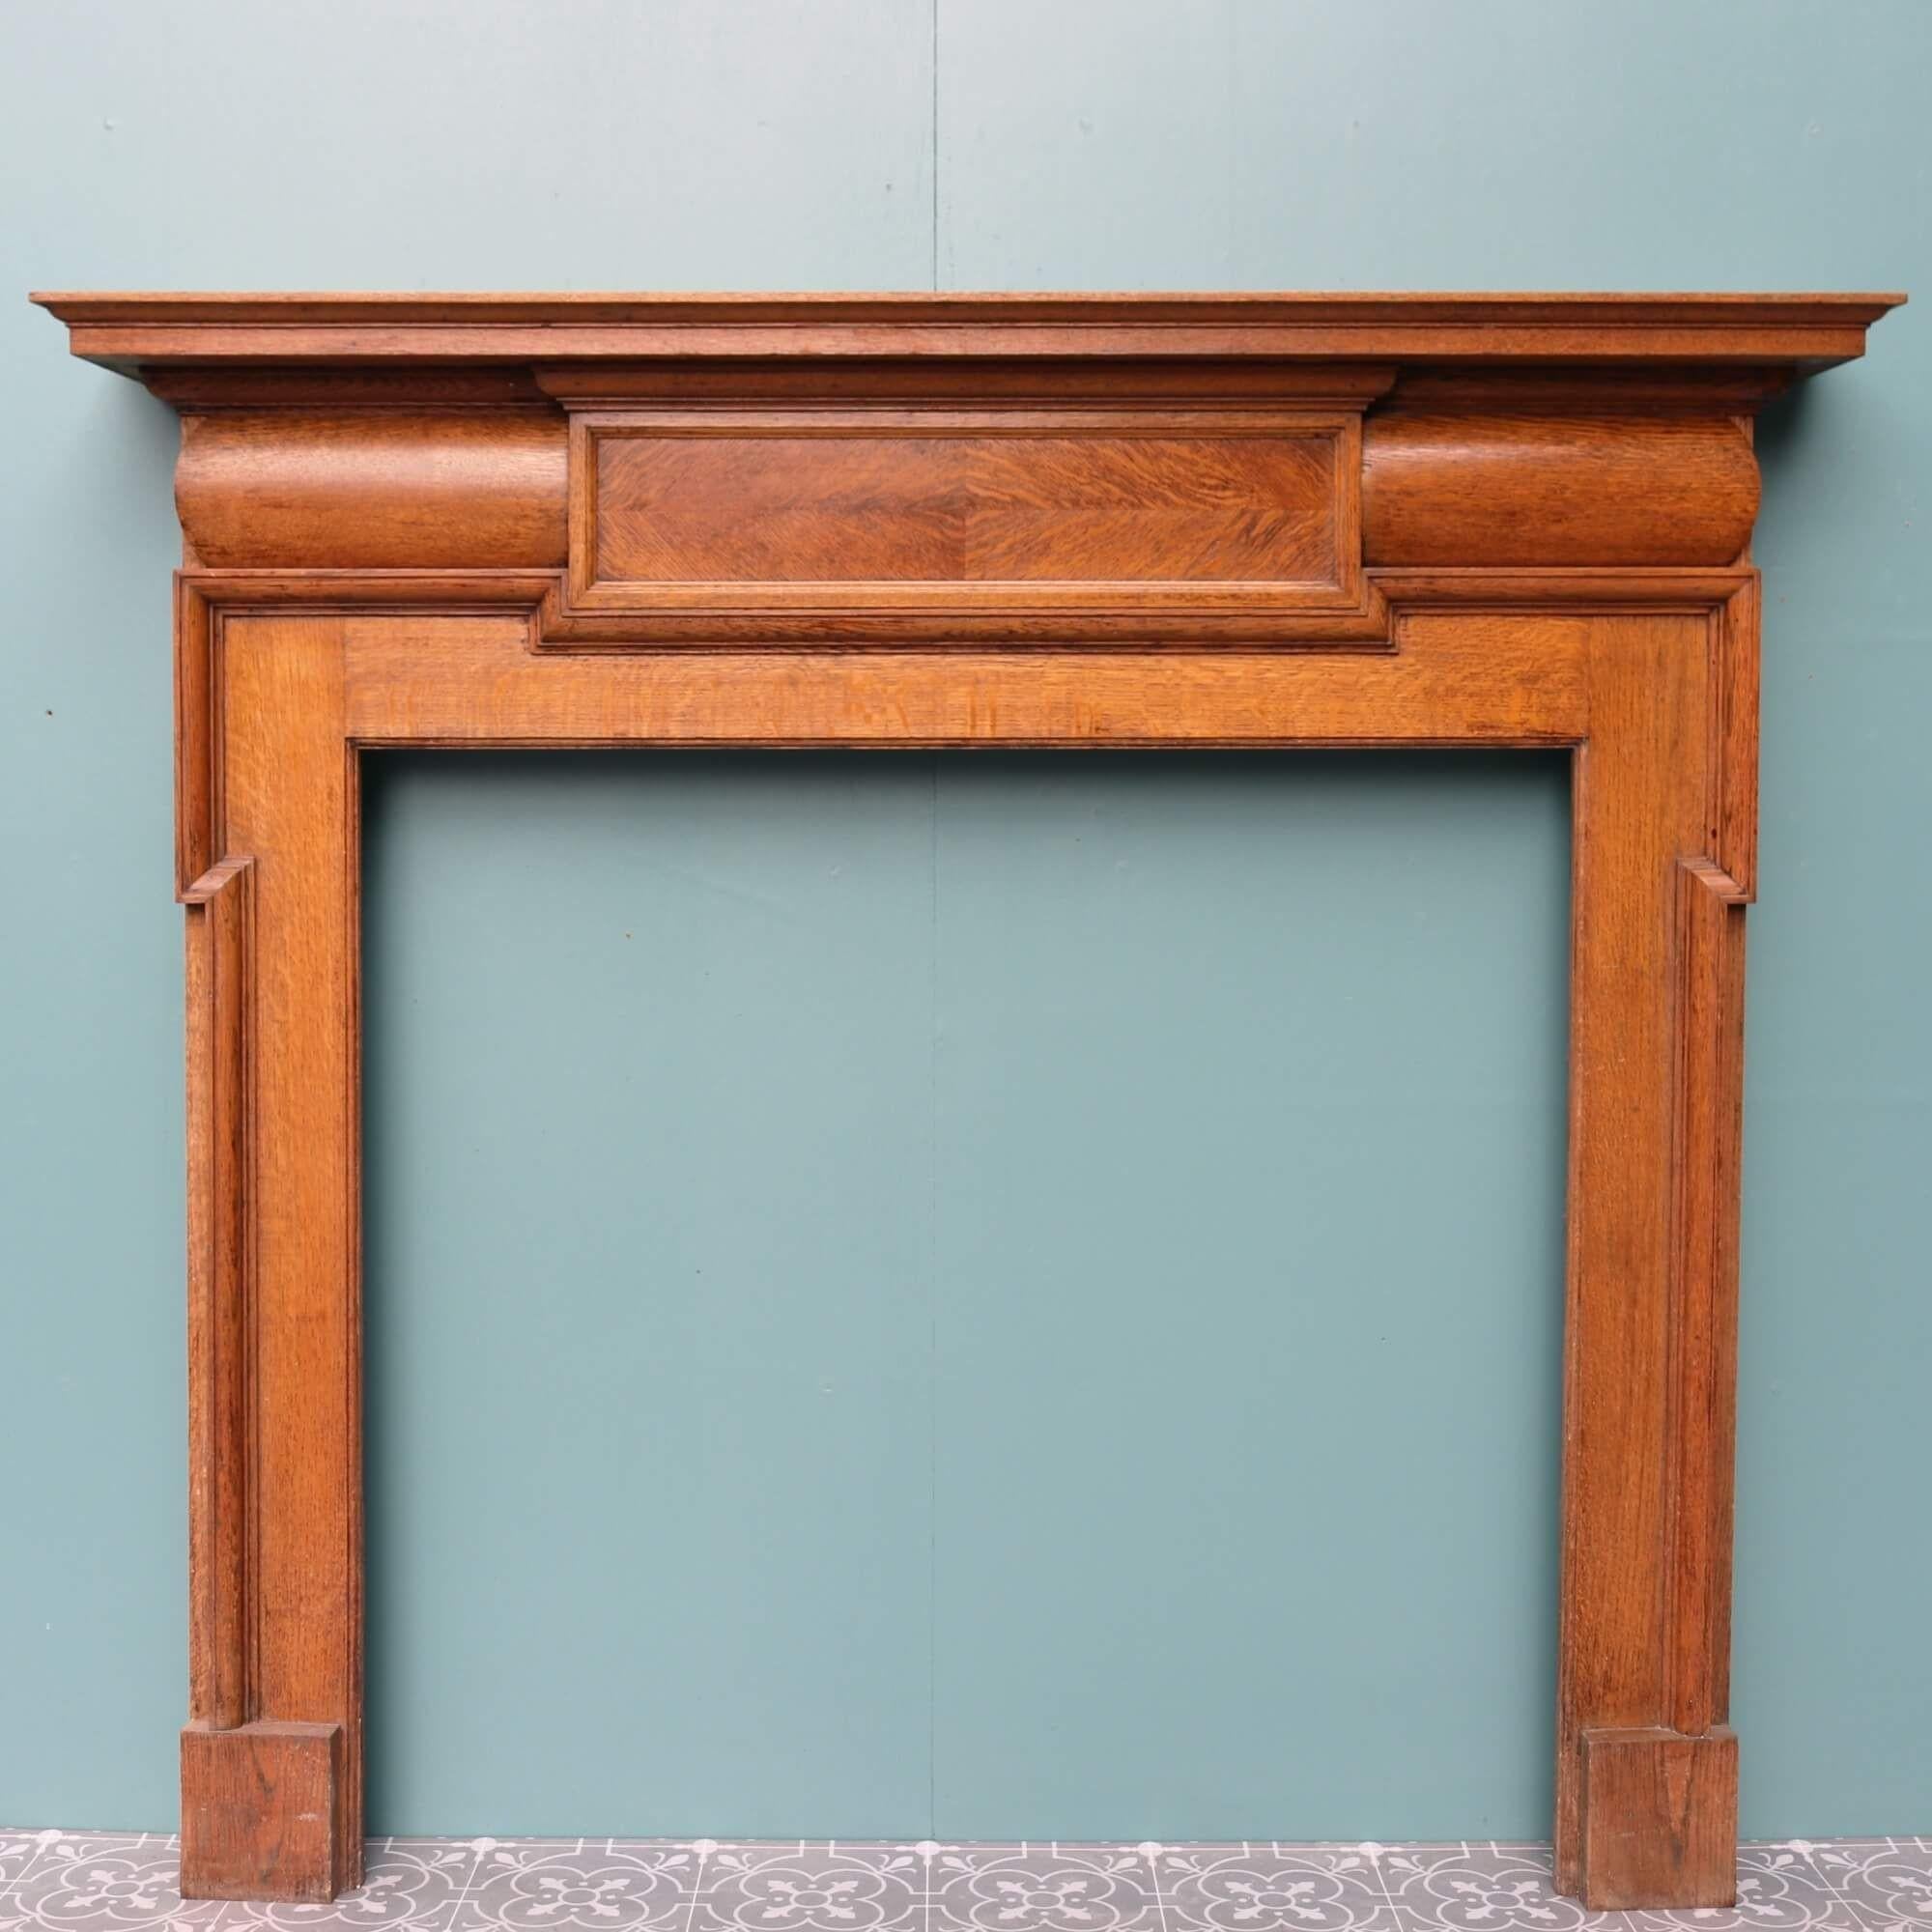 English Victorian Solid Oak Fire Mantel In Fair Condition For Sale In Wormelow, Herefordshire